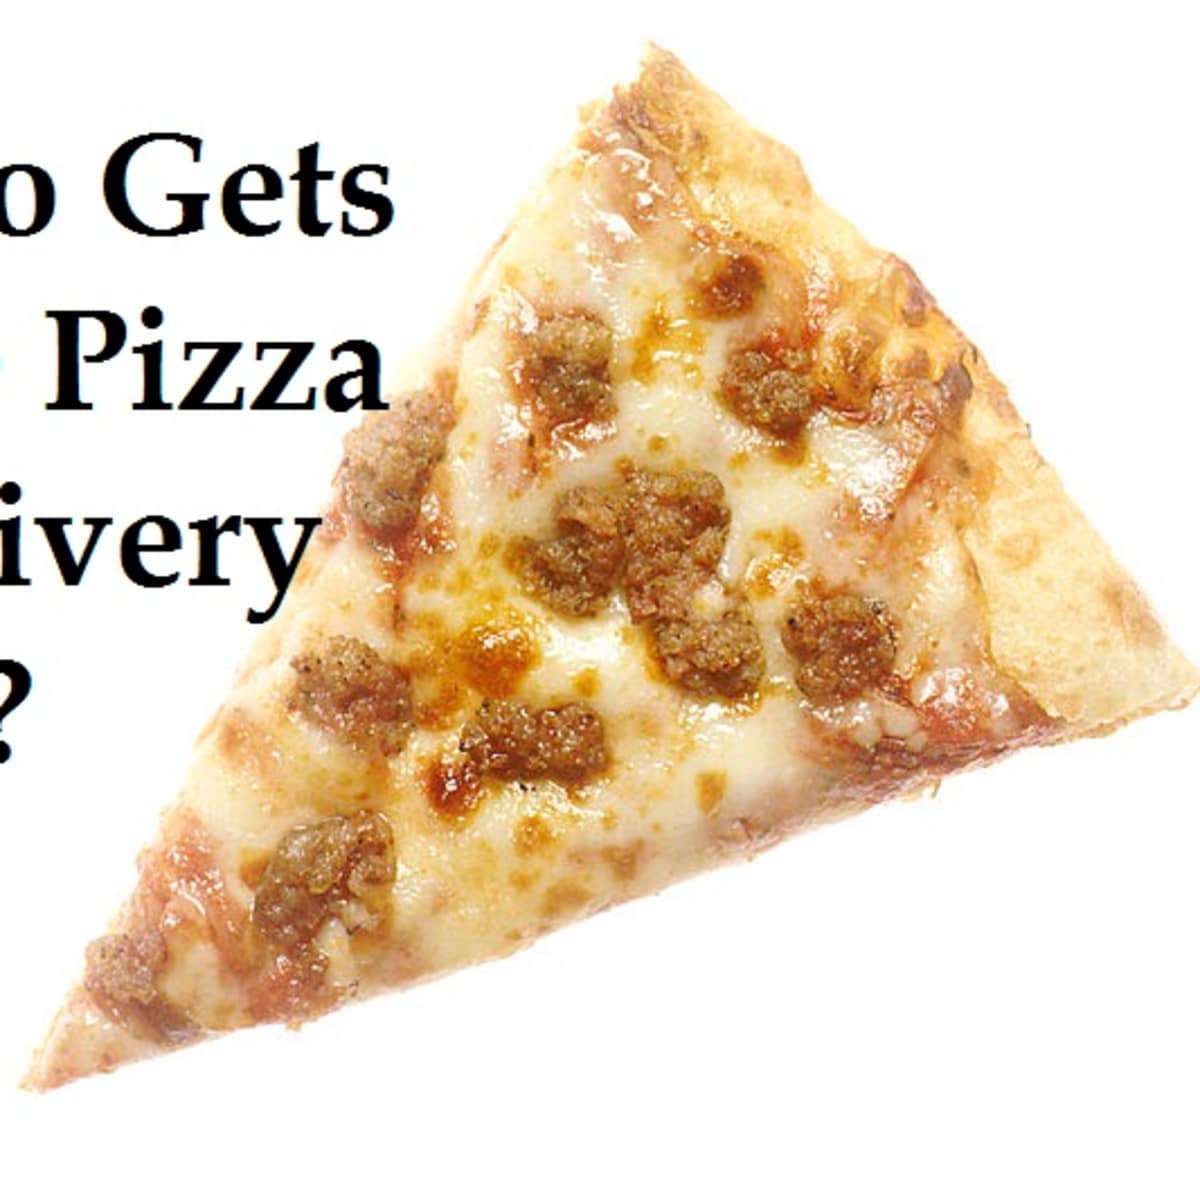 Order Pizza Online, Pizza Delivery, Takeout or Dine-In across Ontario